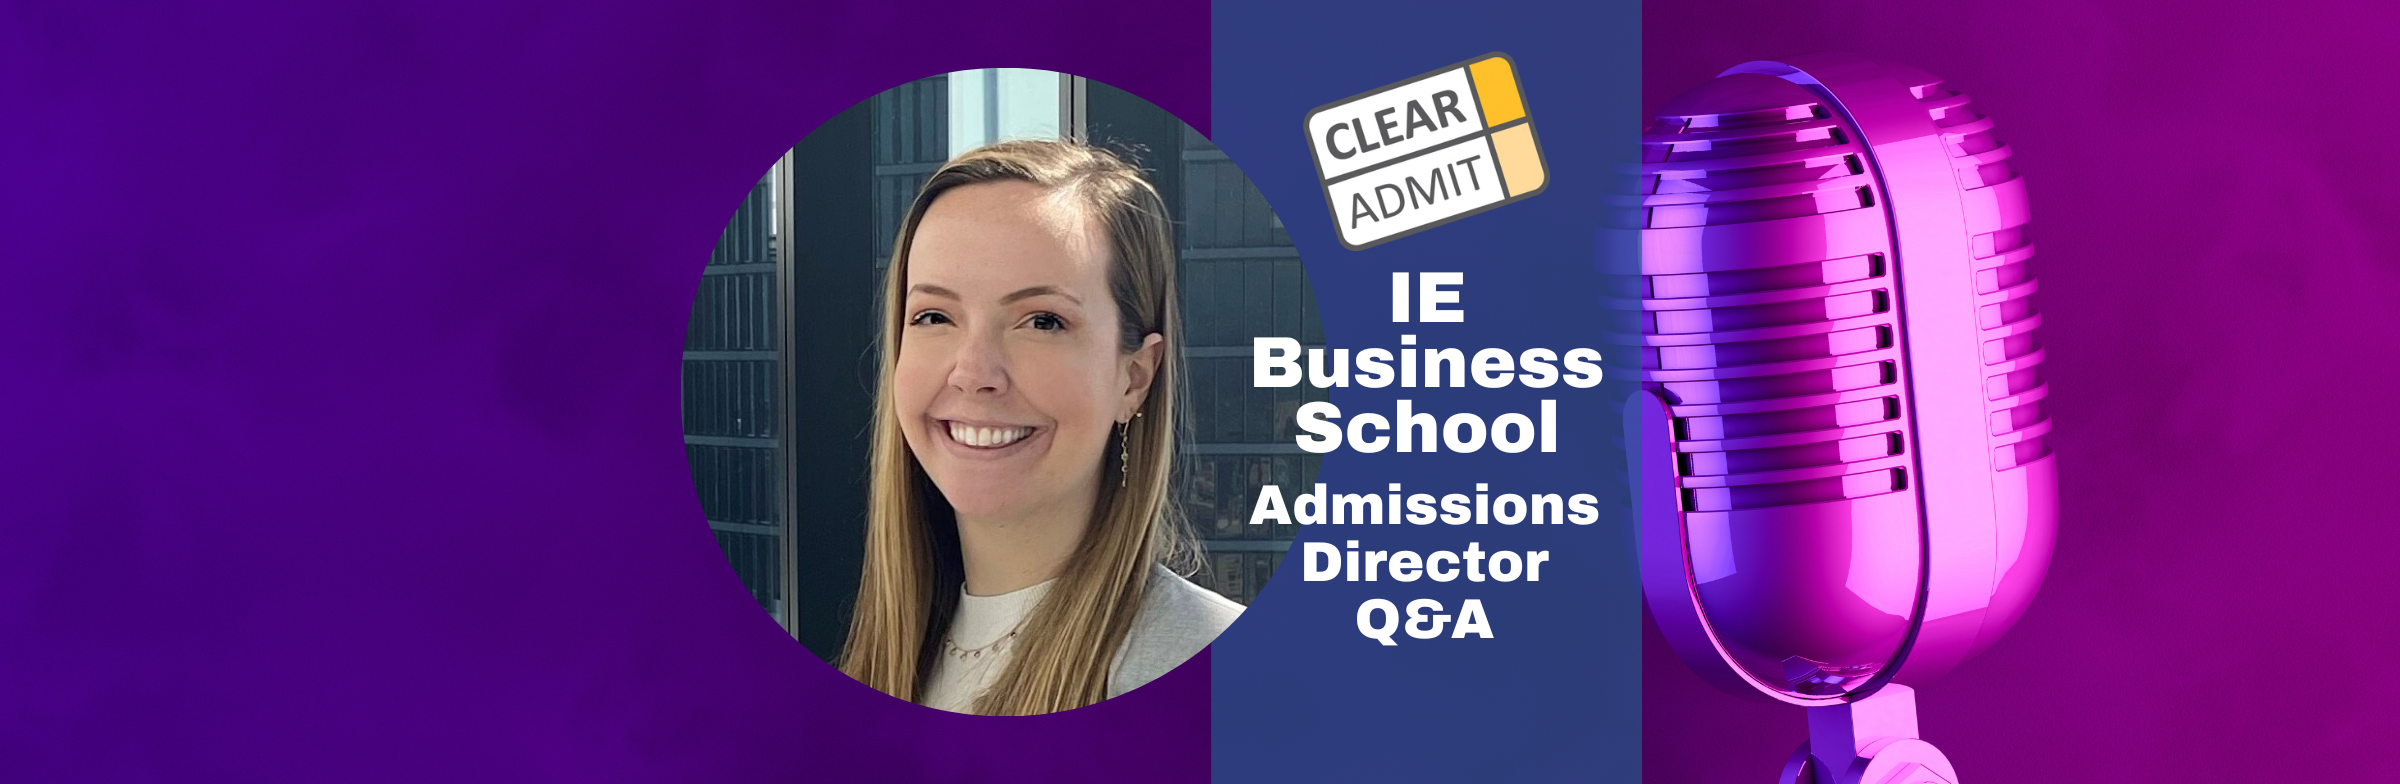 Image for Admissions Director Q&A: Liz Hutchinson of IE Business School